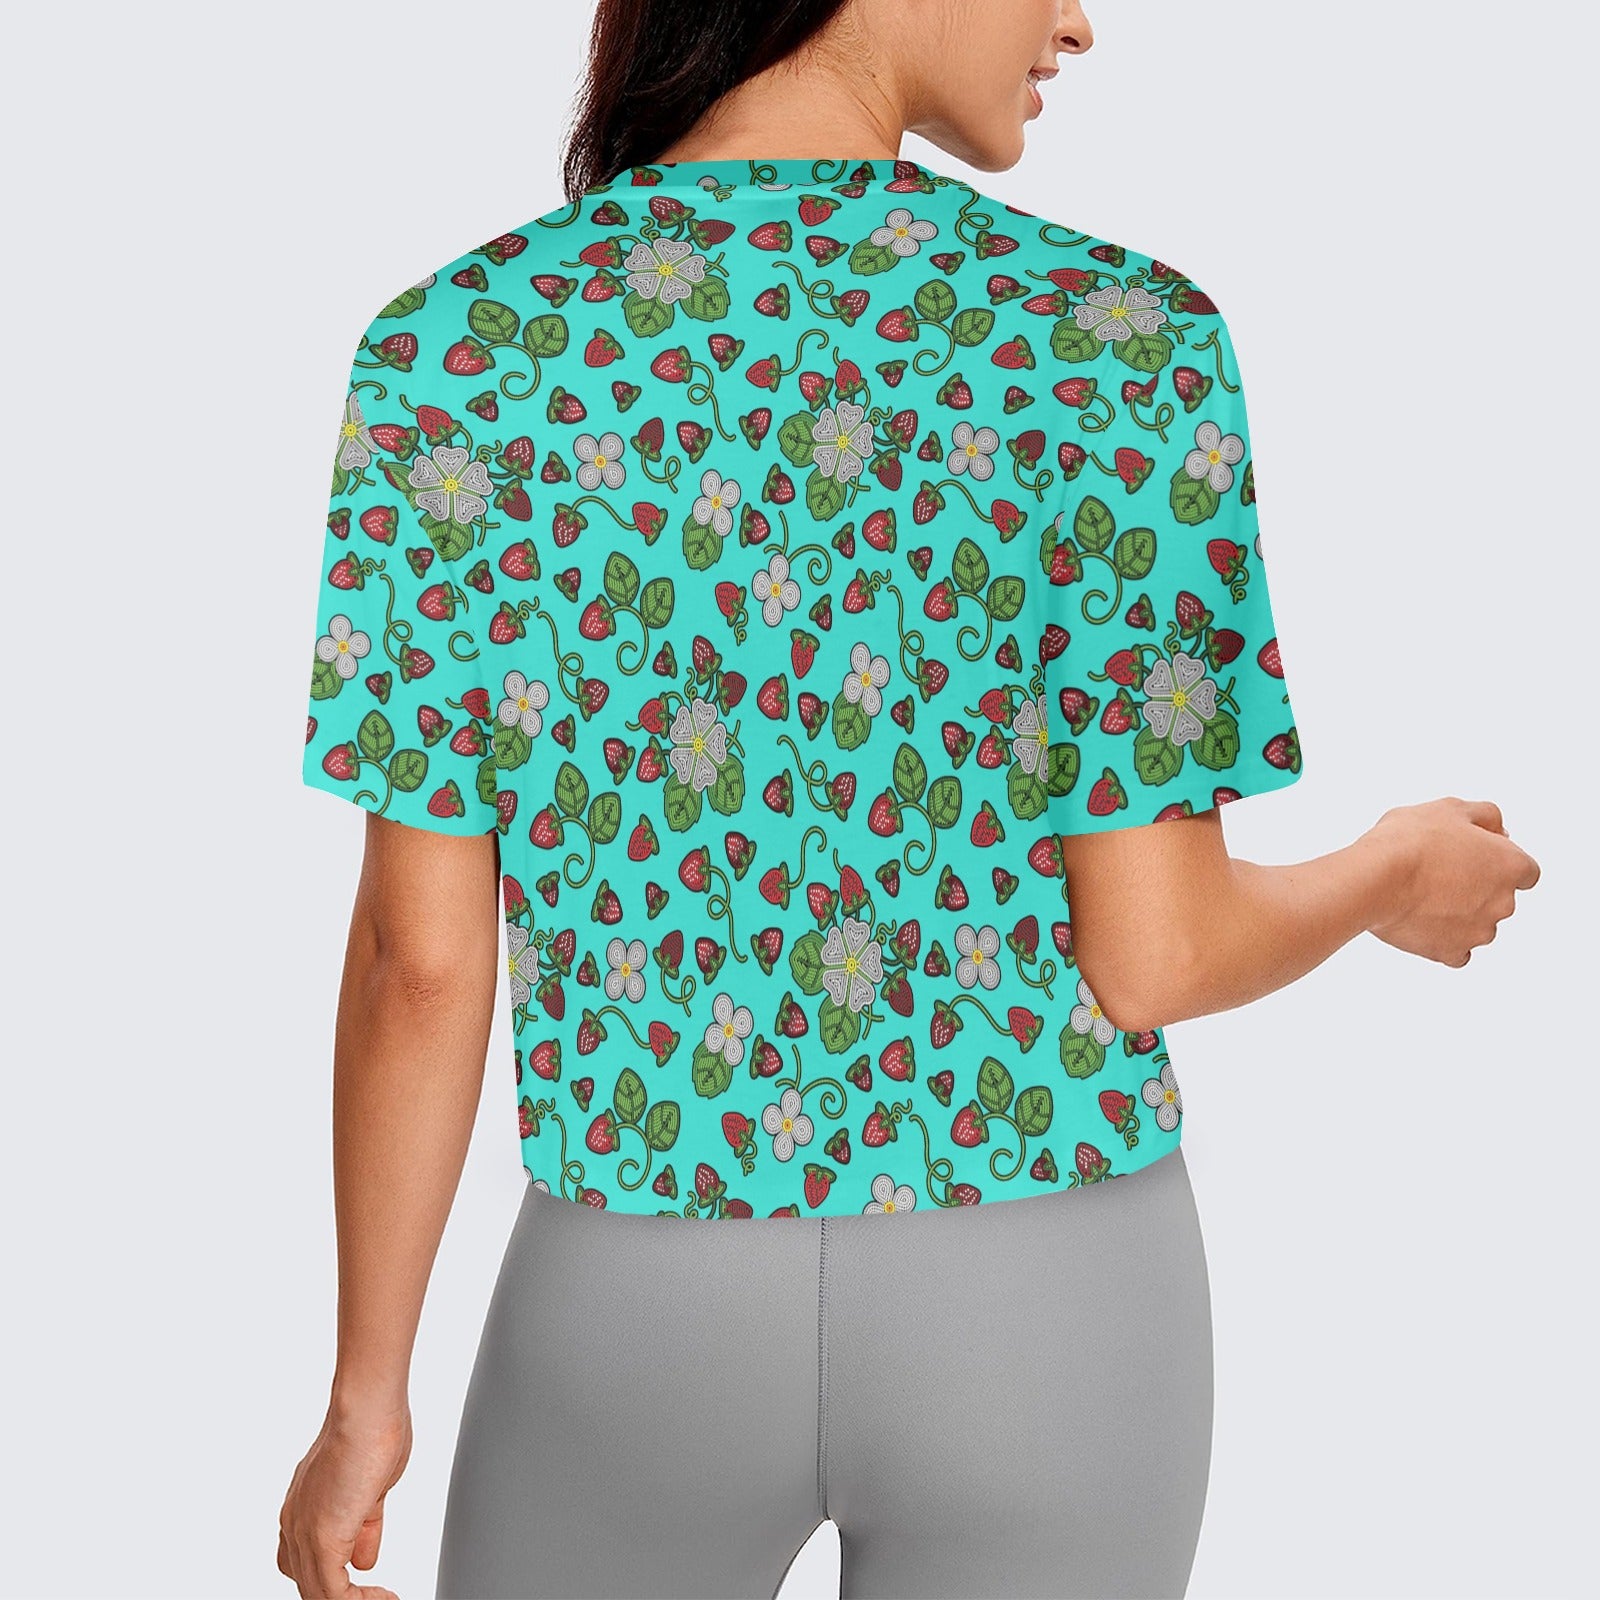 Strawberry Dreams Turquoise Women's Cropped T-shirt